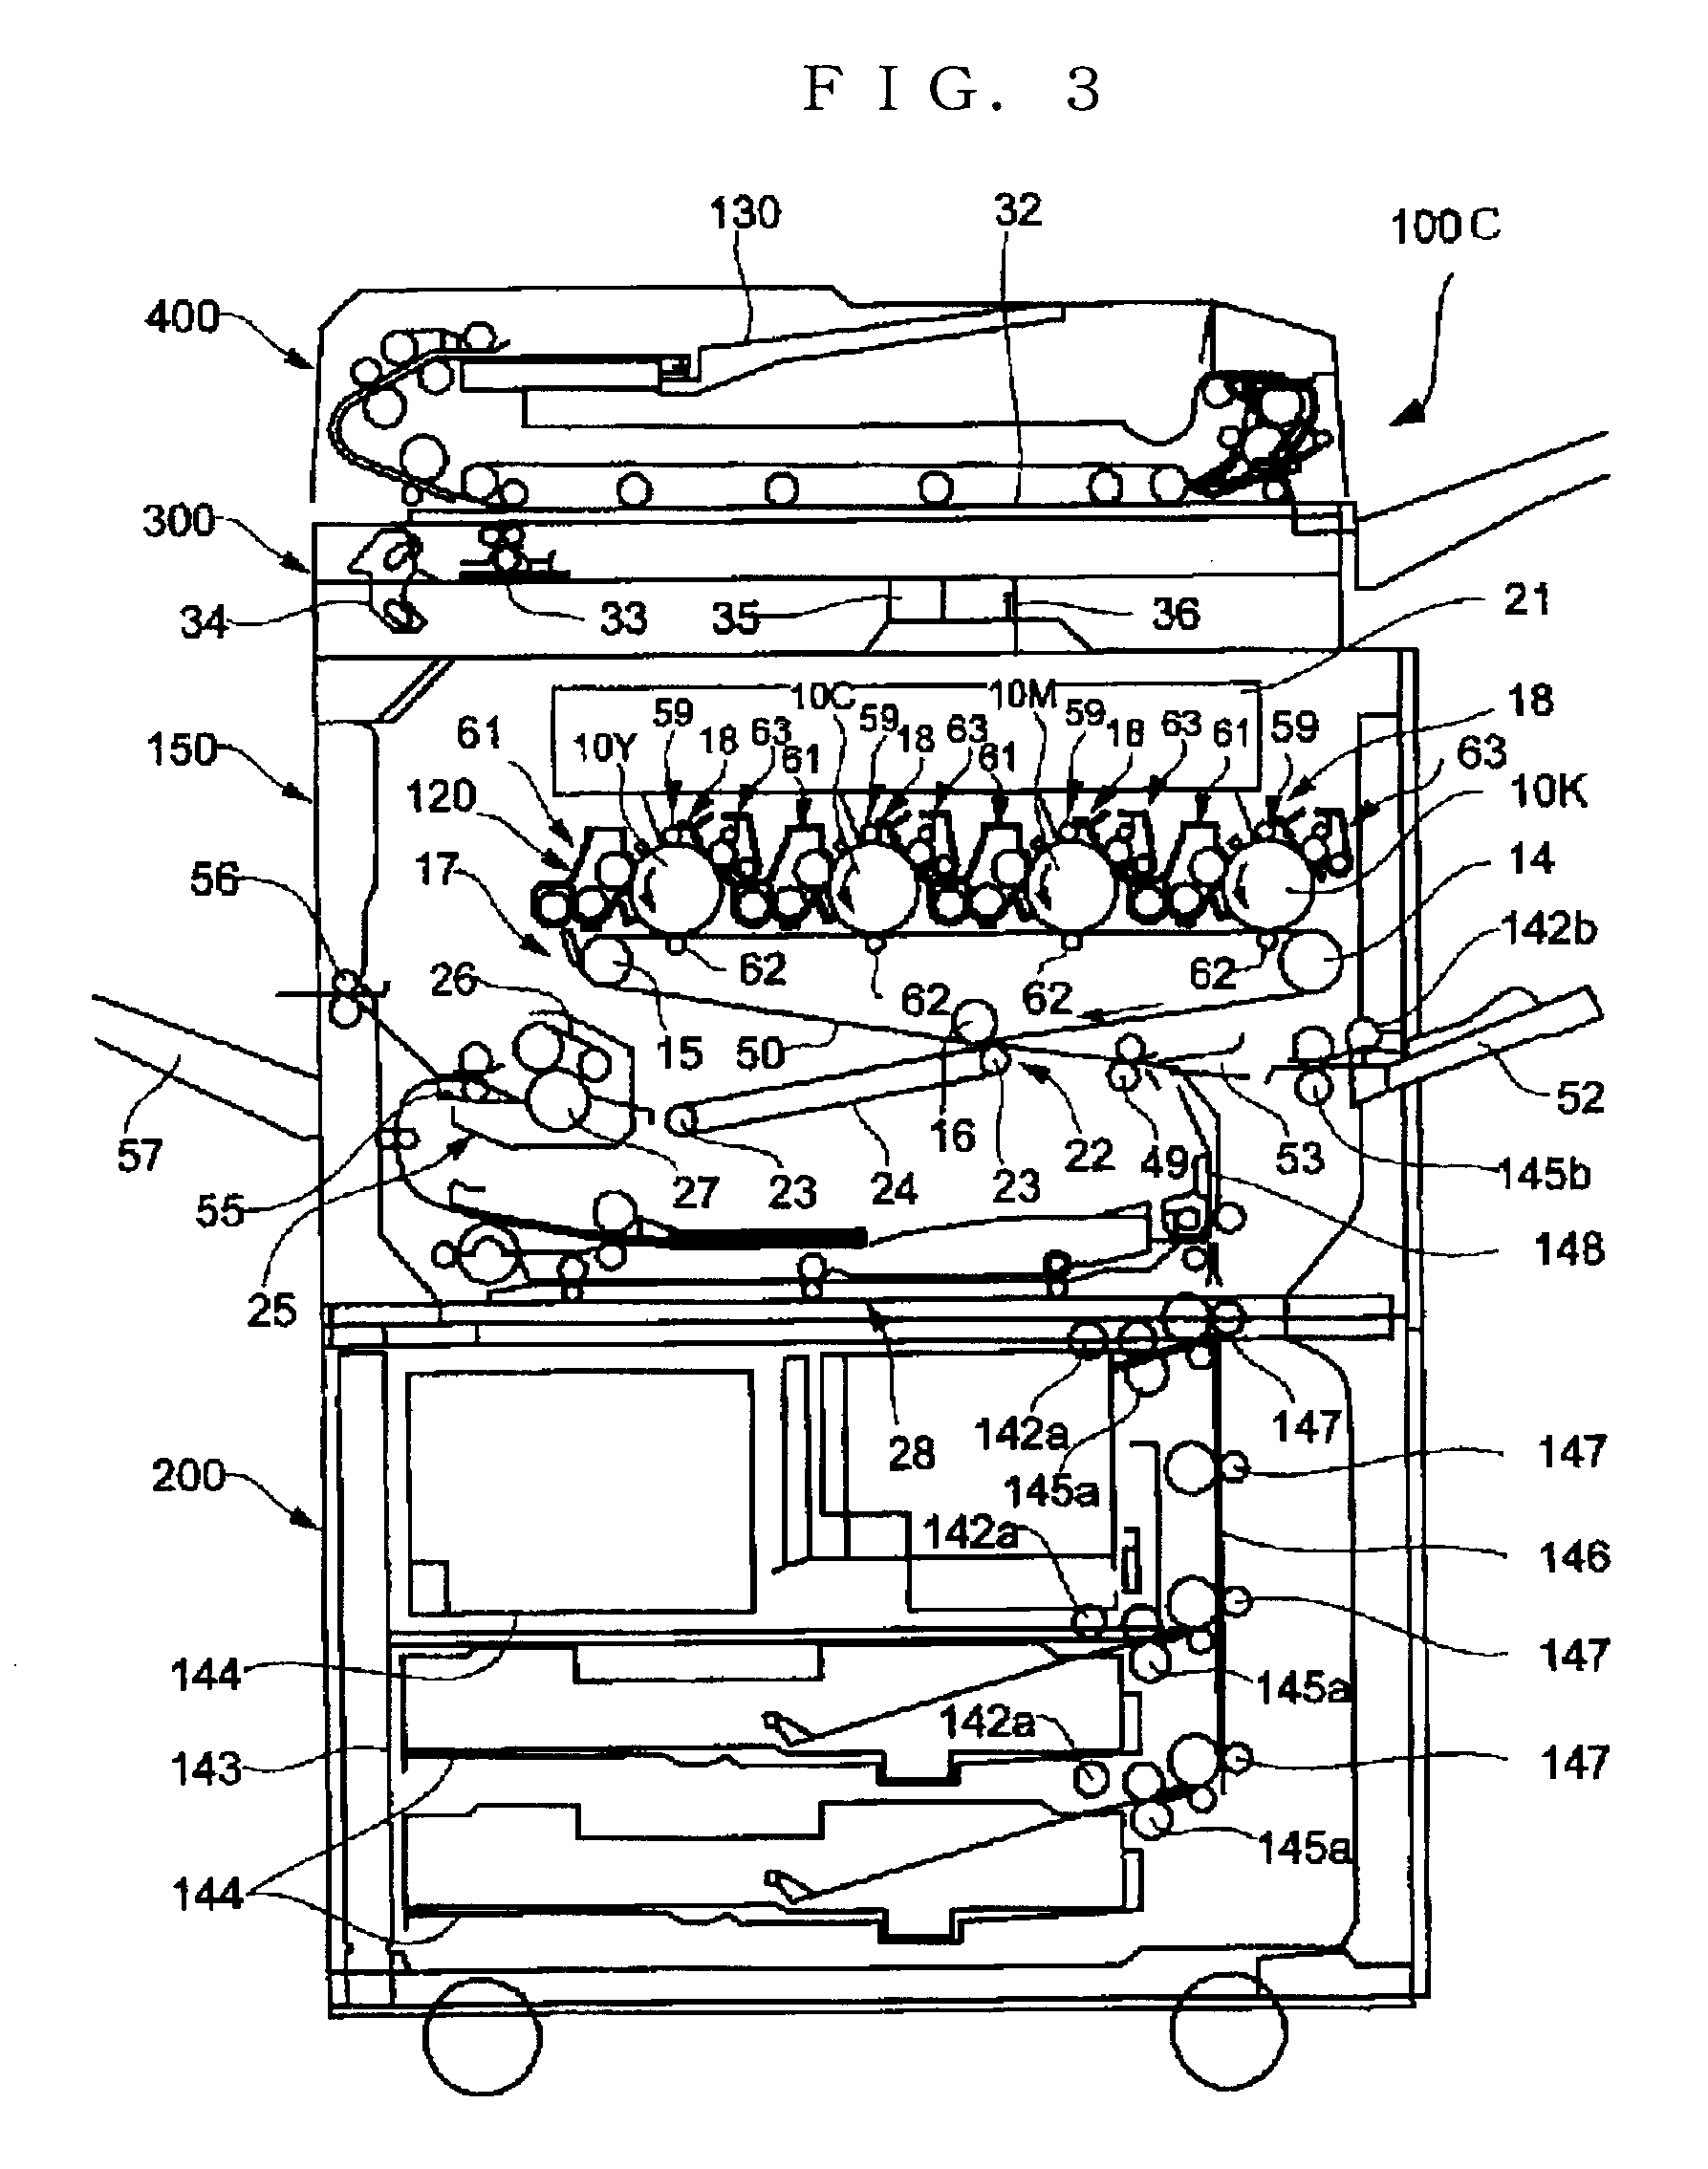 Toner, method for producing the toner and image forming apparatus